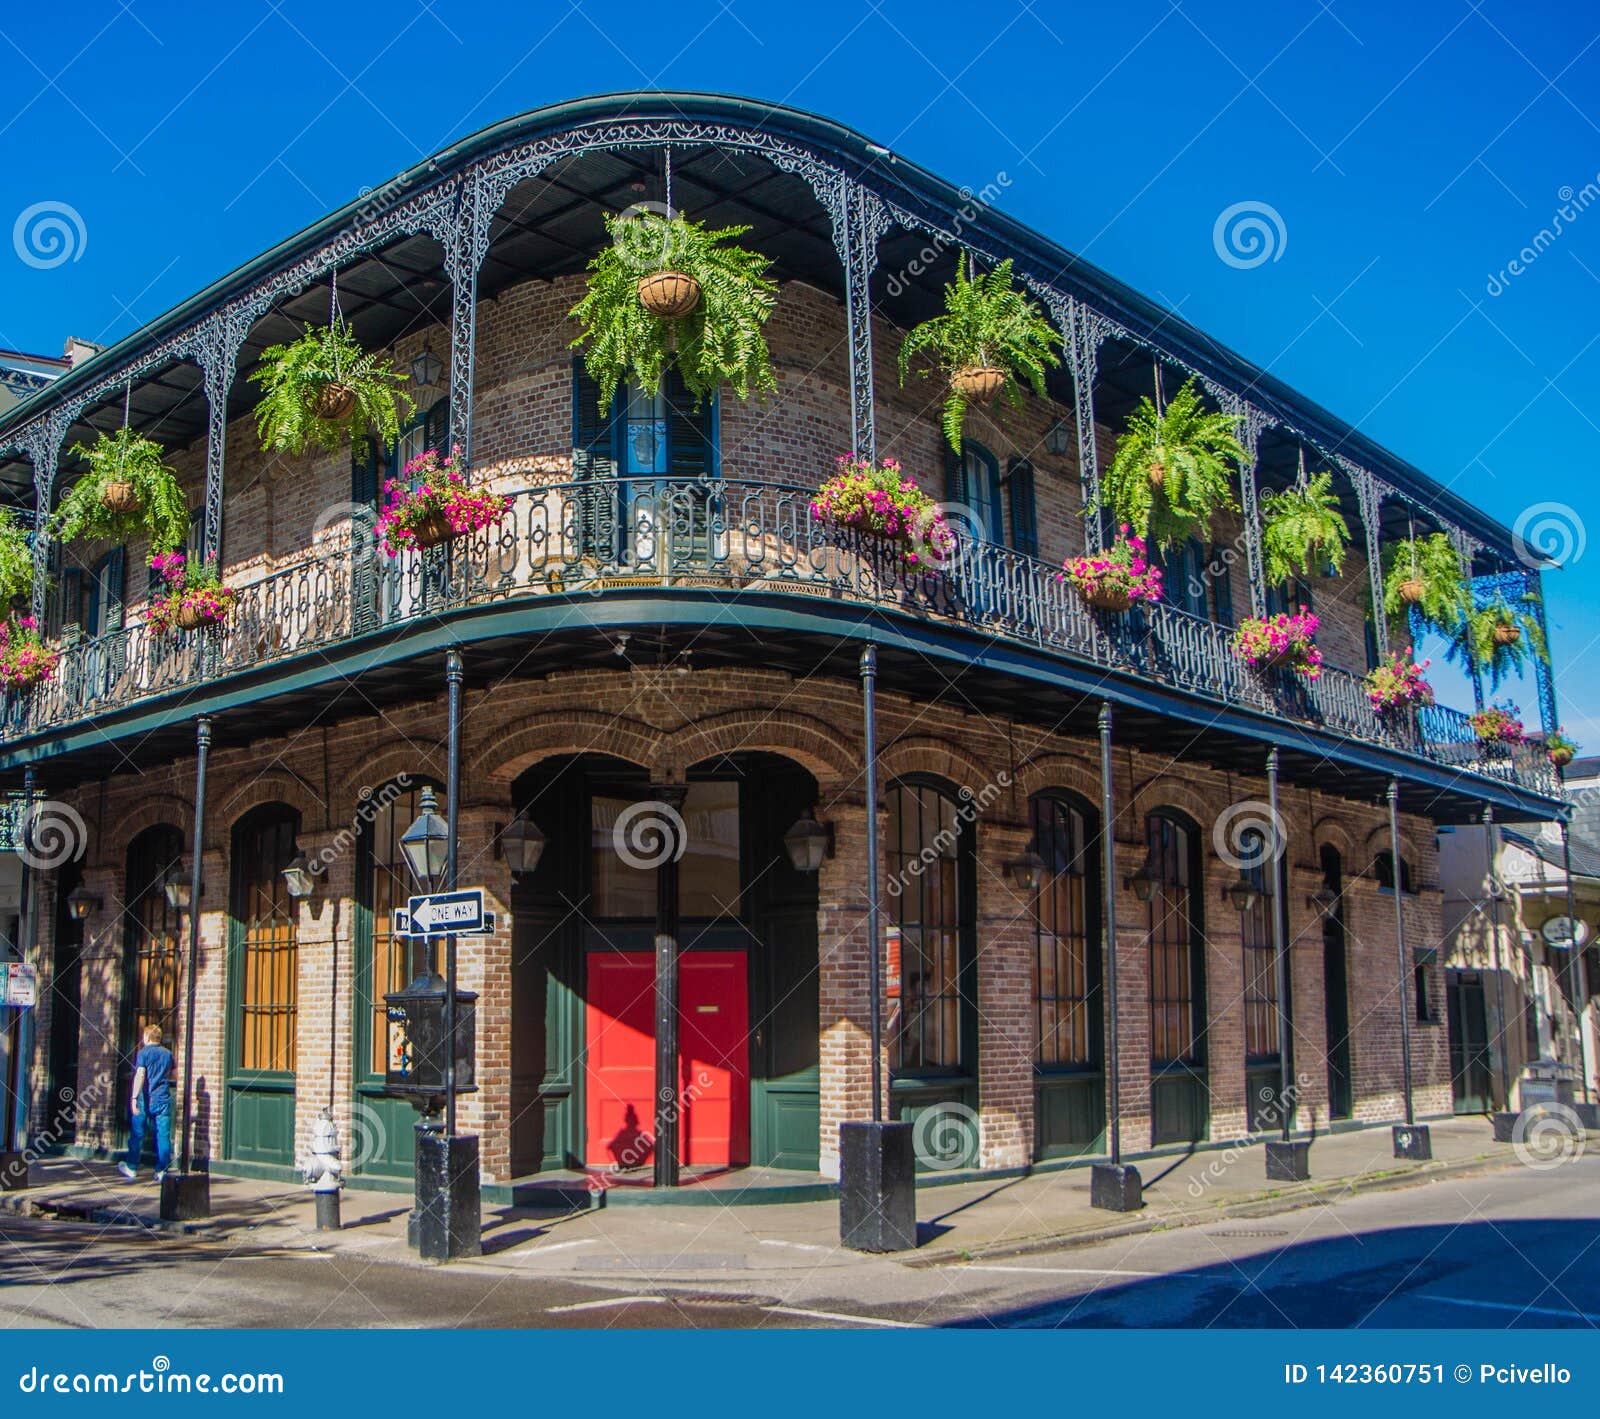 french quarter architecture in new orleans, louisiana.